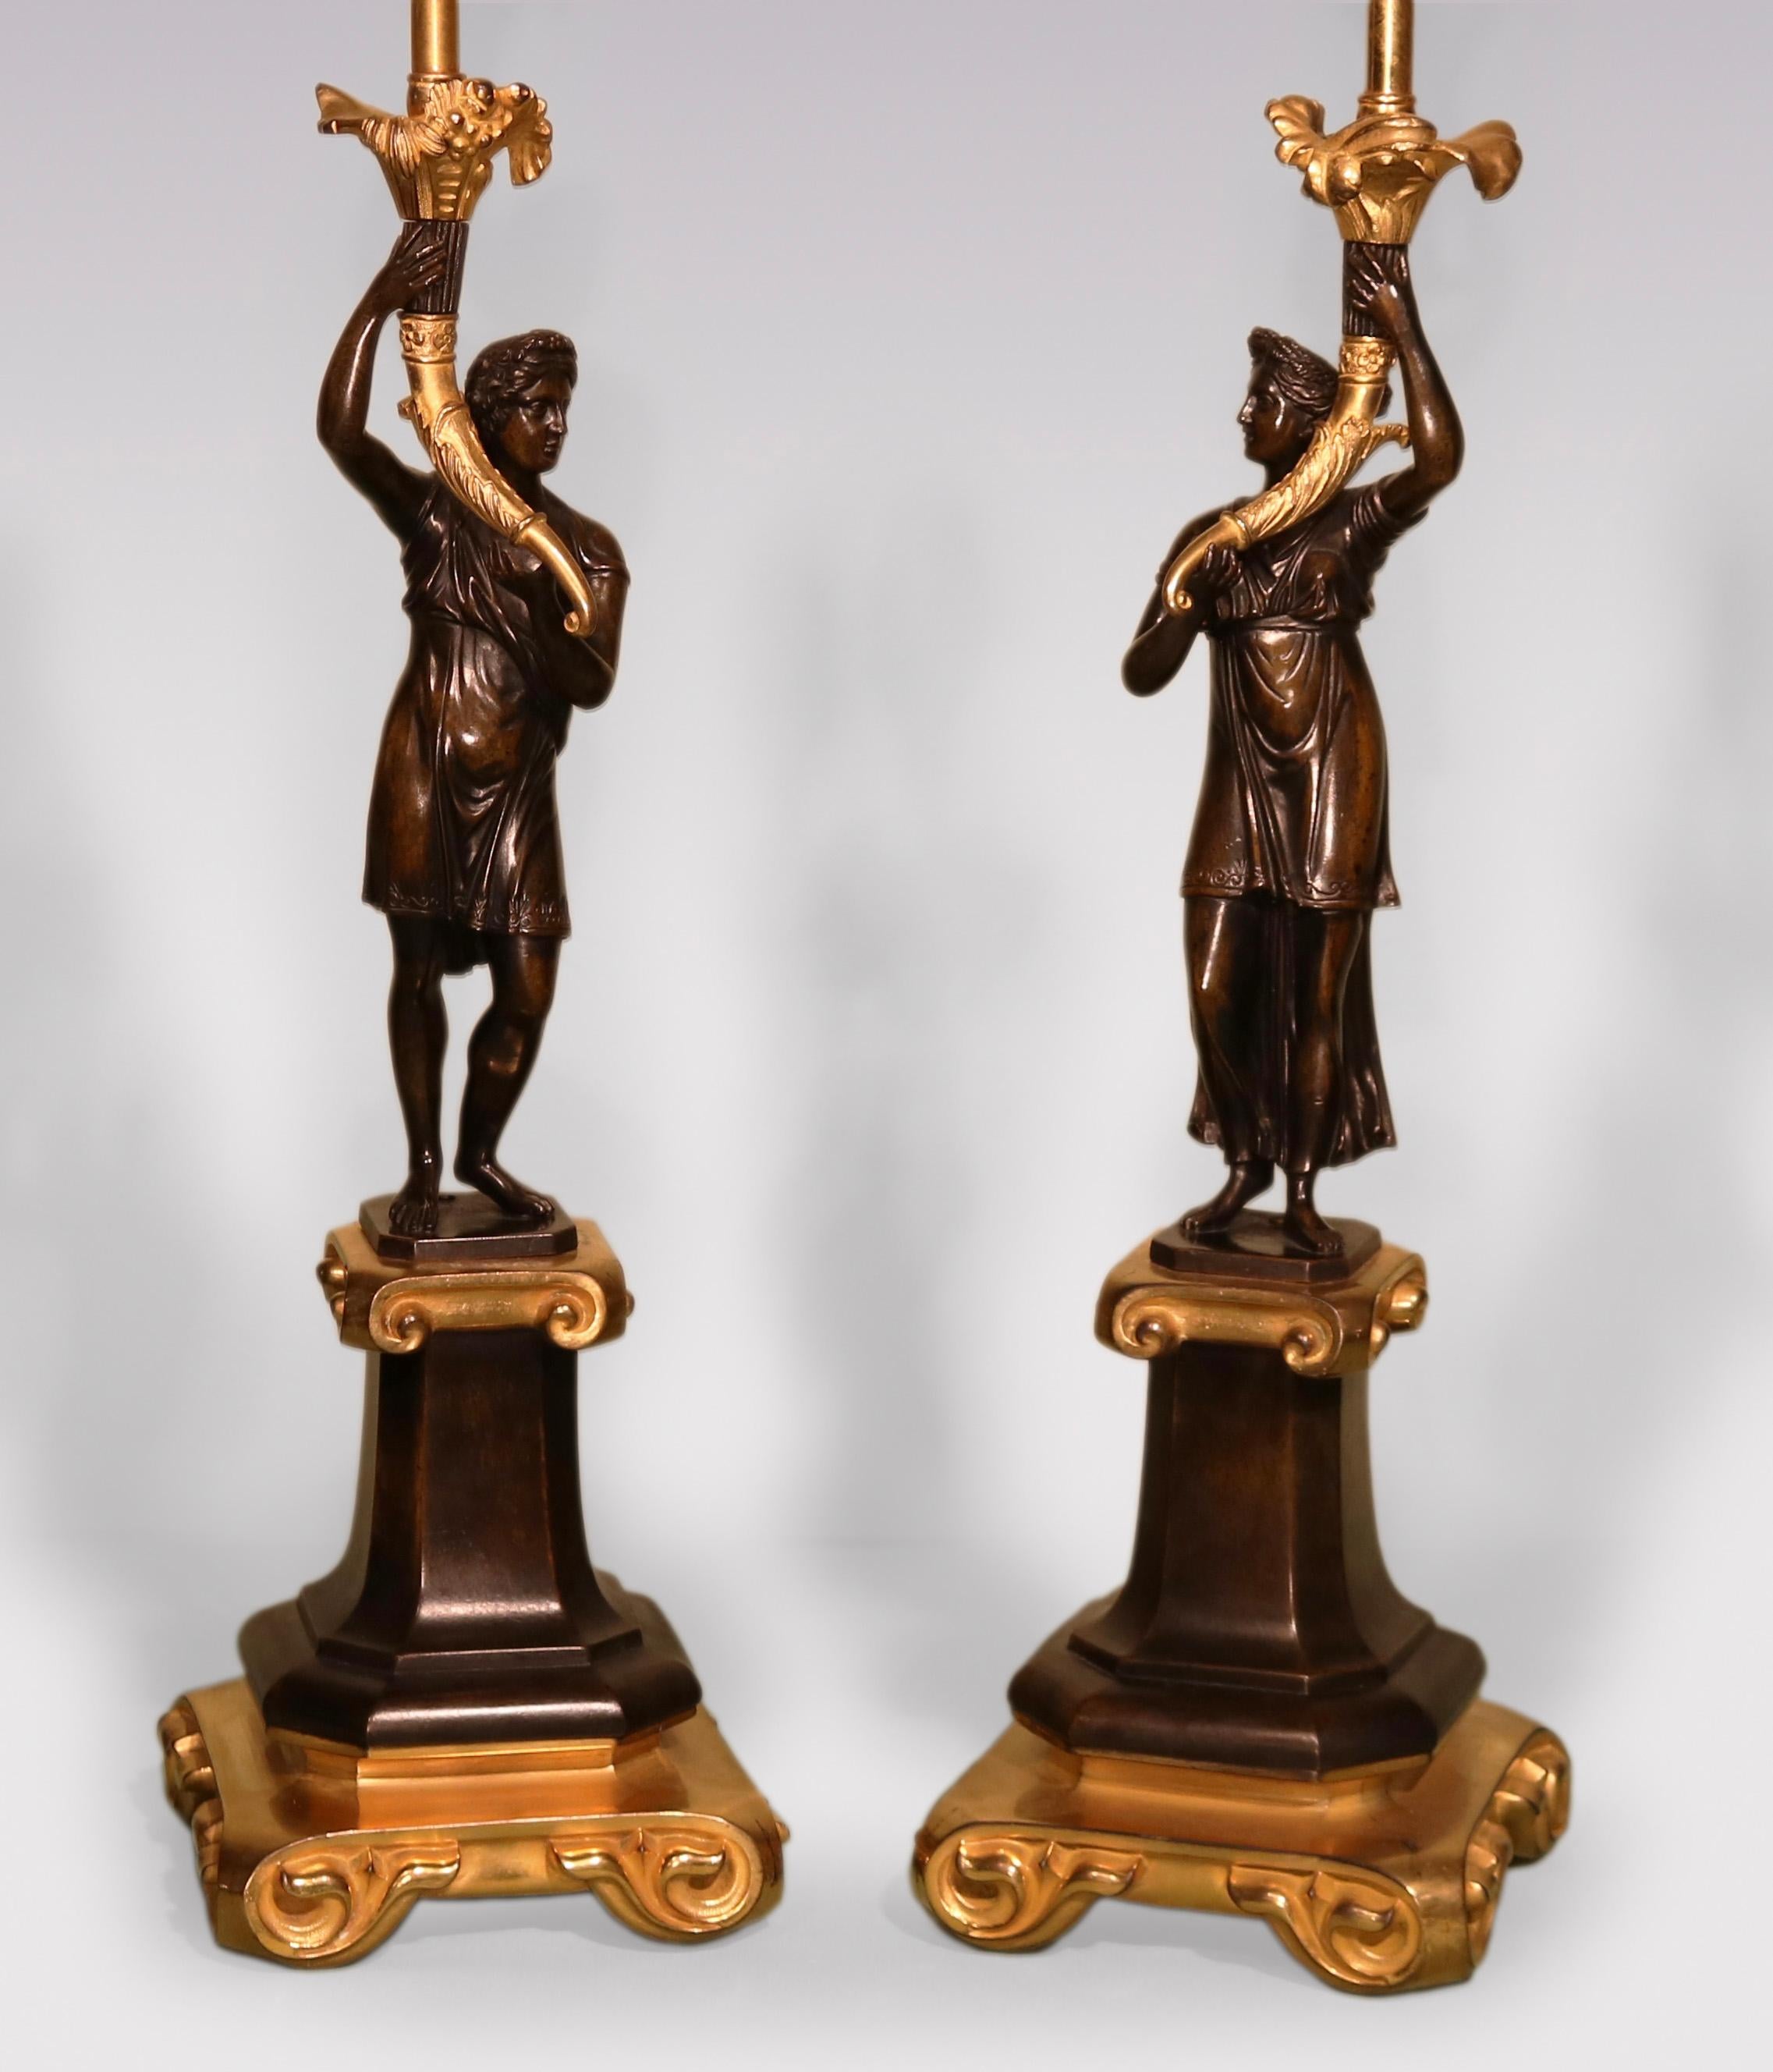 An unusual pair of early 19th century Regency period Bronze and Ormolu Candlesticks with male and female classical figures holding ‘Cornucopia sconces’ standing on scrolled platforms, raised on shaped square plinths ending on bold scrolled feet.